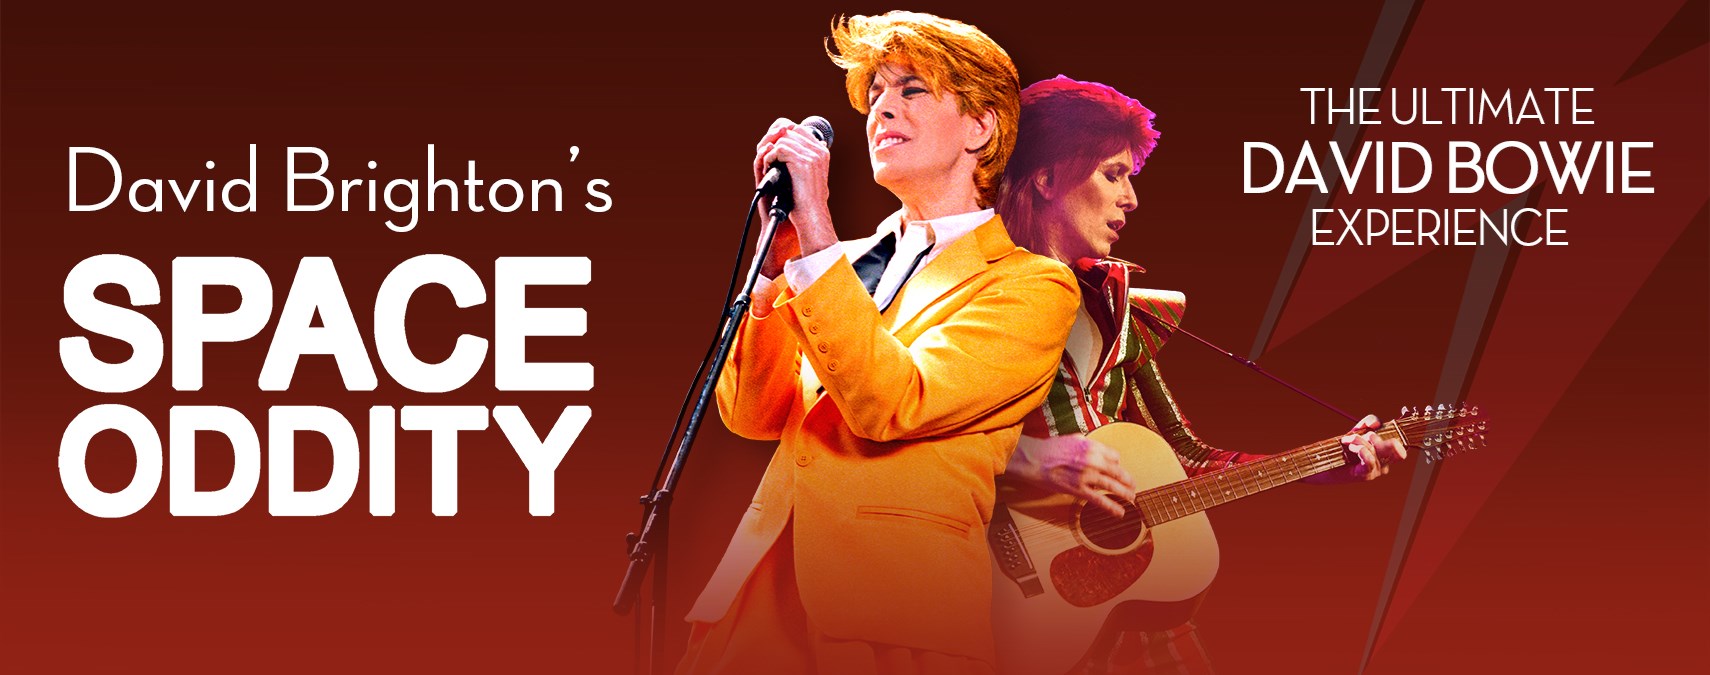 Space Oddity: The Ultimate David Bowie Experience-April 1, 2023 at 8pm